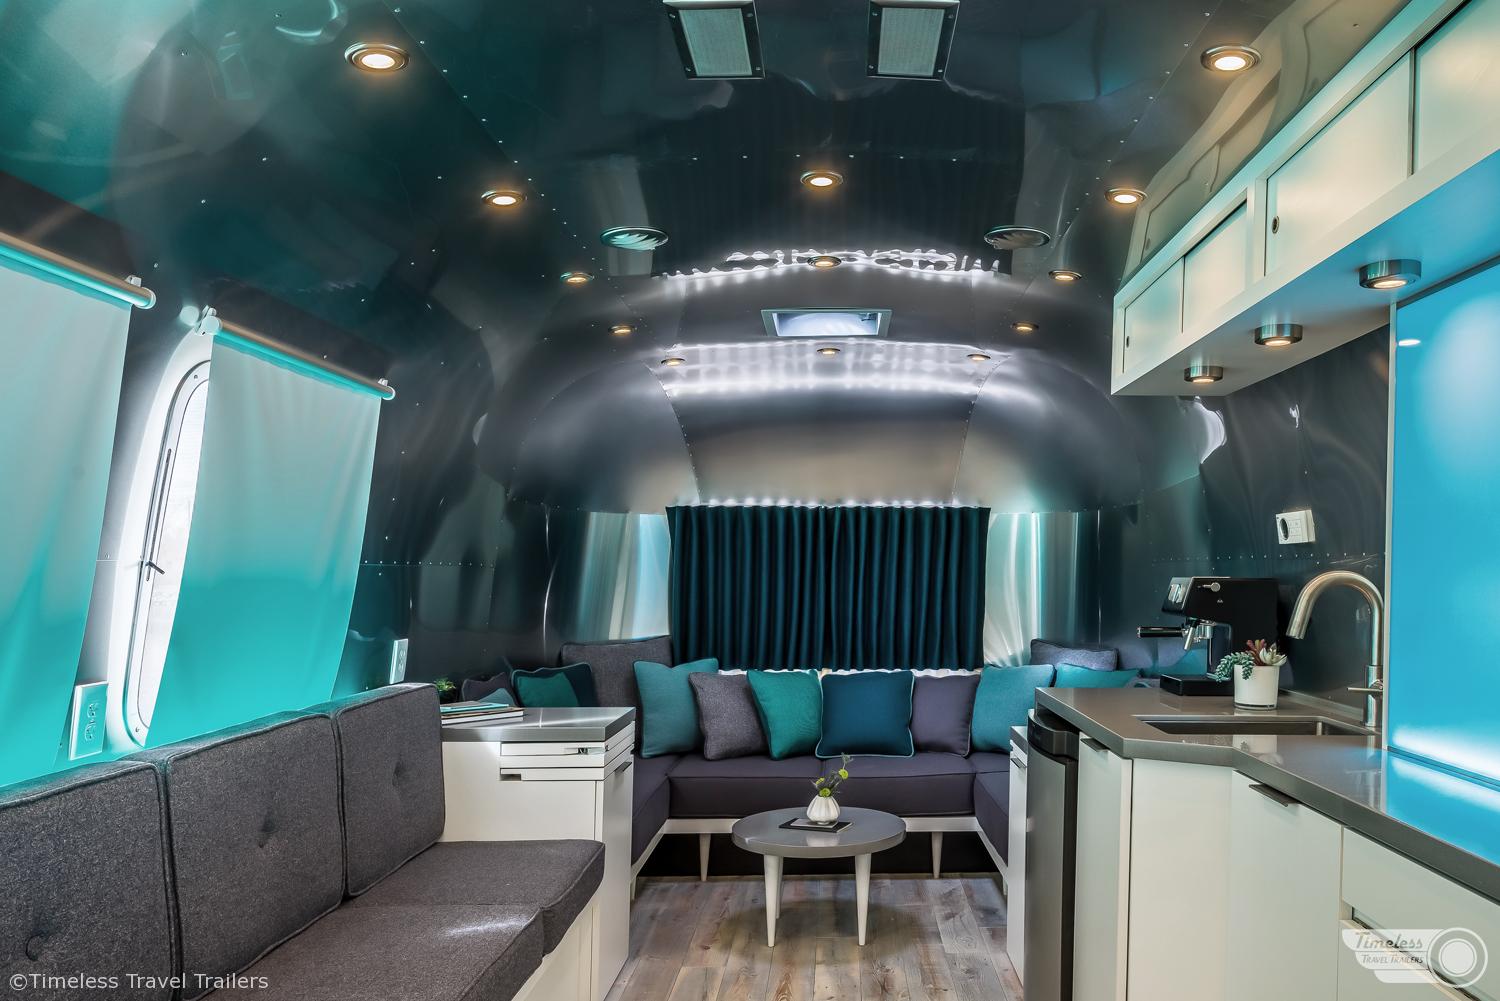 SHIFT Trade Show Airstream by Timeless Travel Trailers